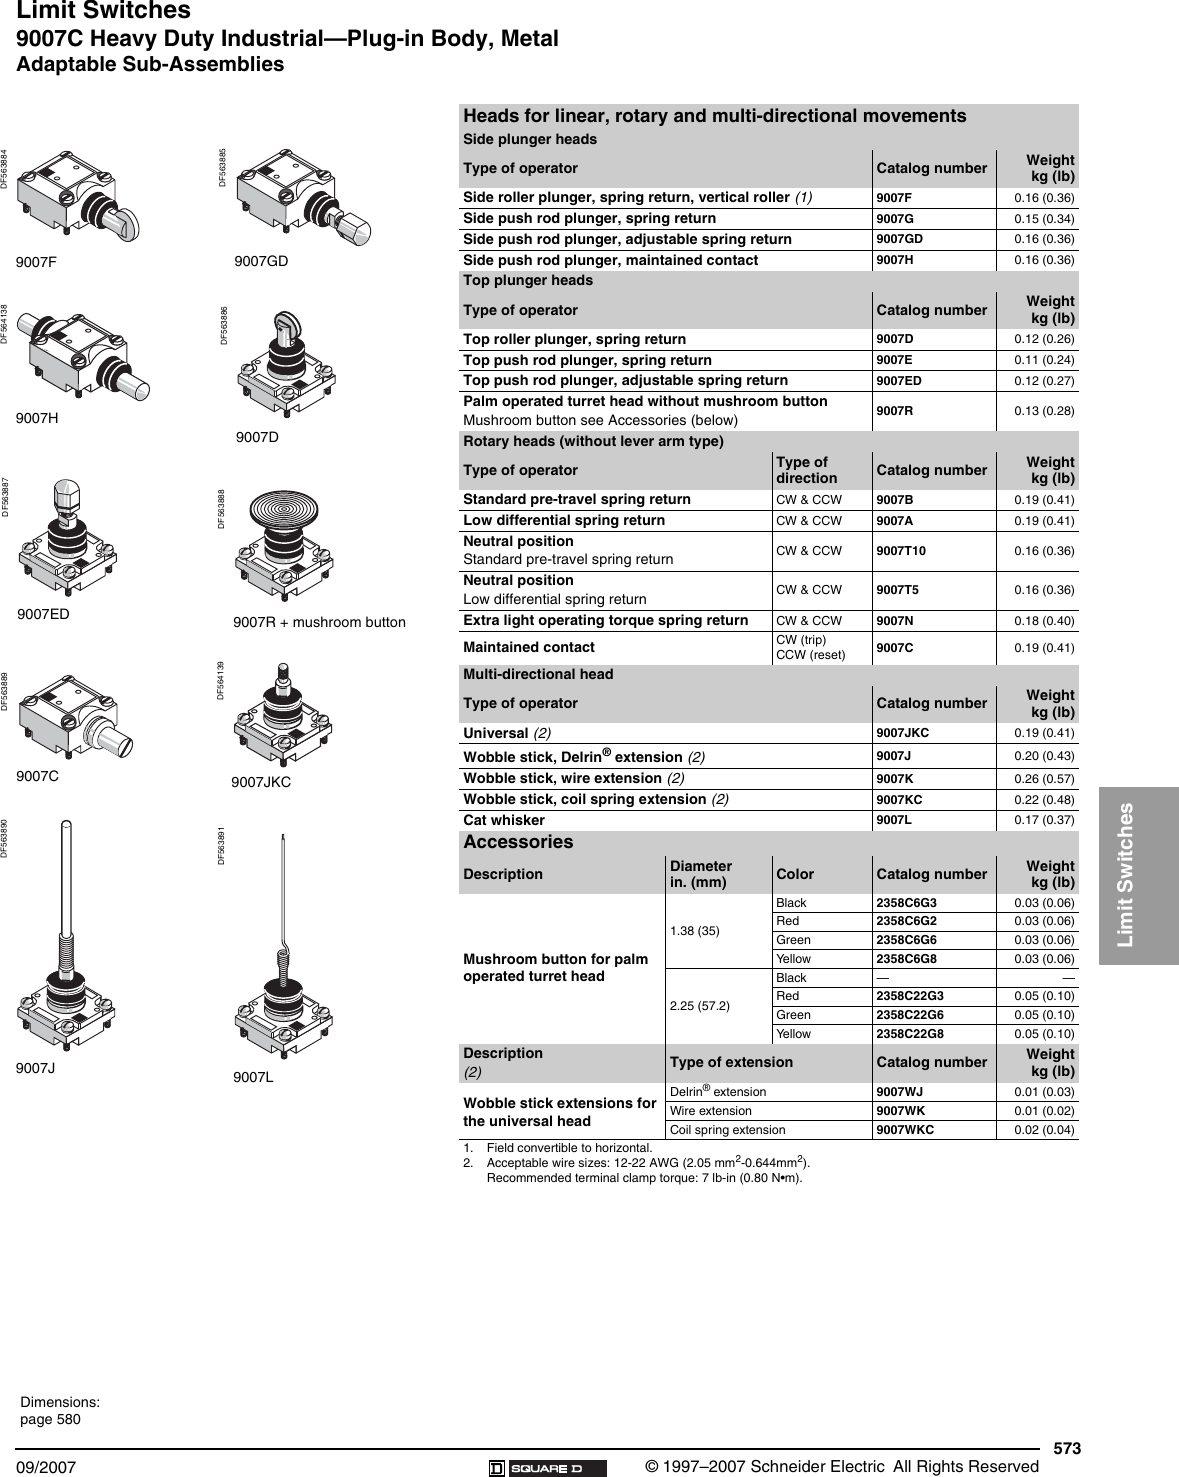 Page 1 of 1 - Sensors, Limit Switches, And Connector Cables, 9006CT0101  Brochure